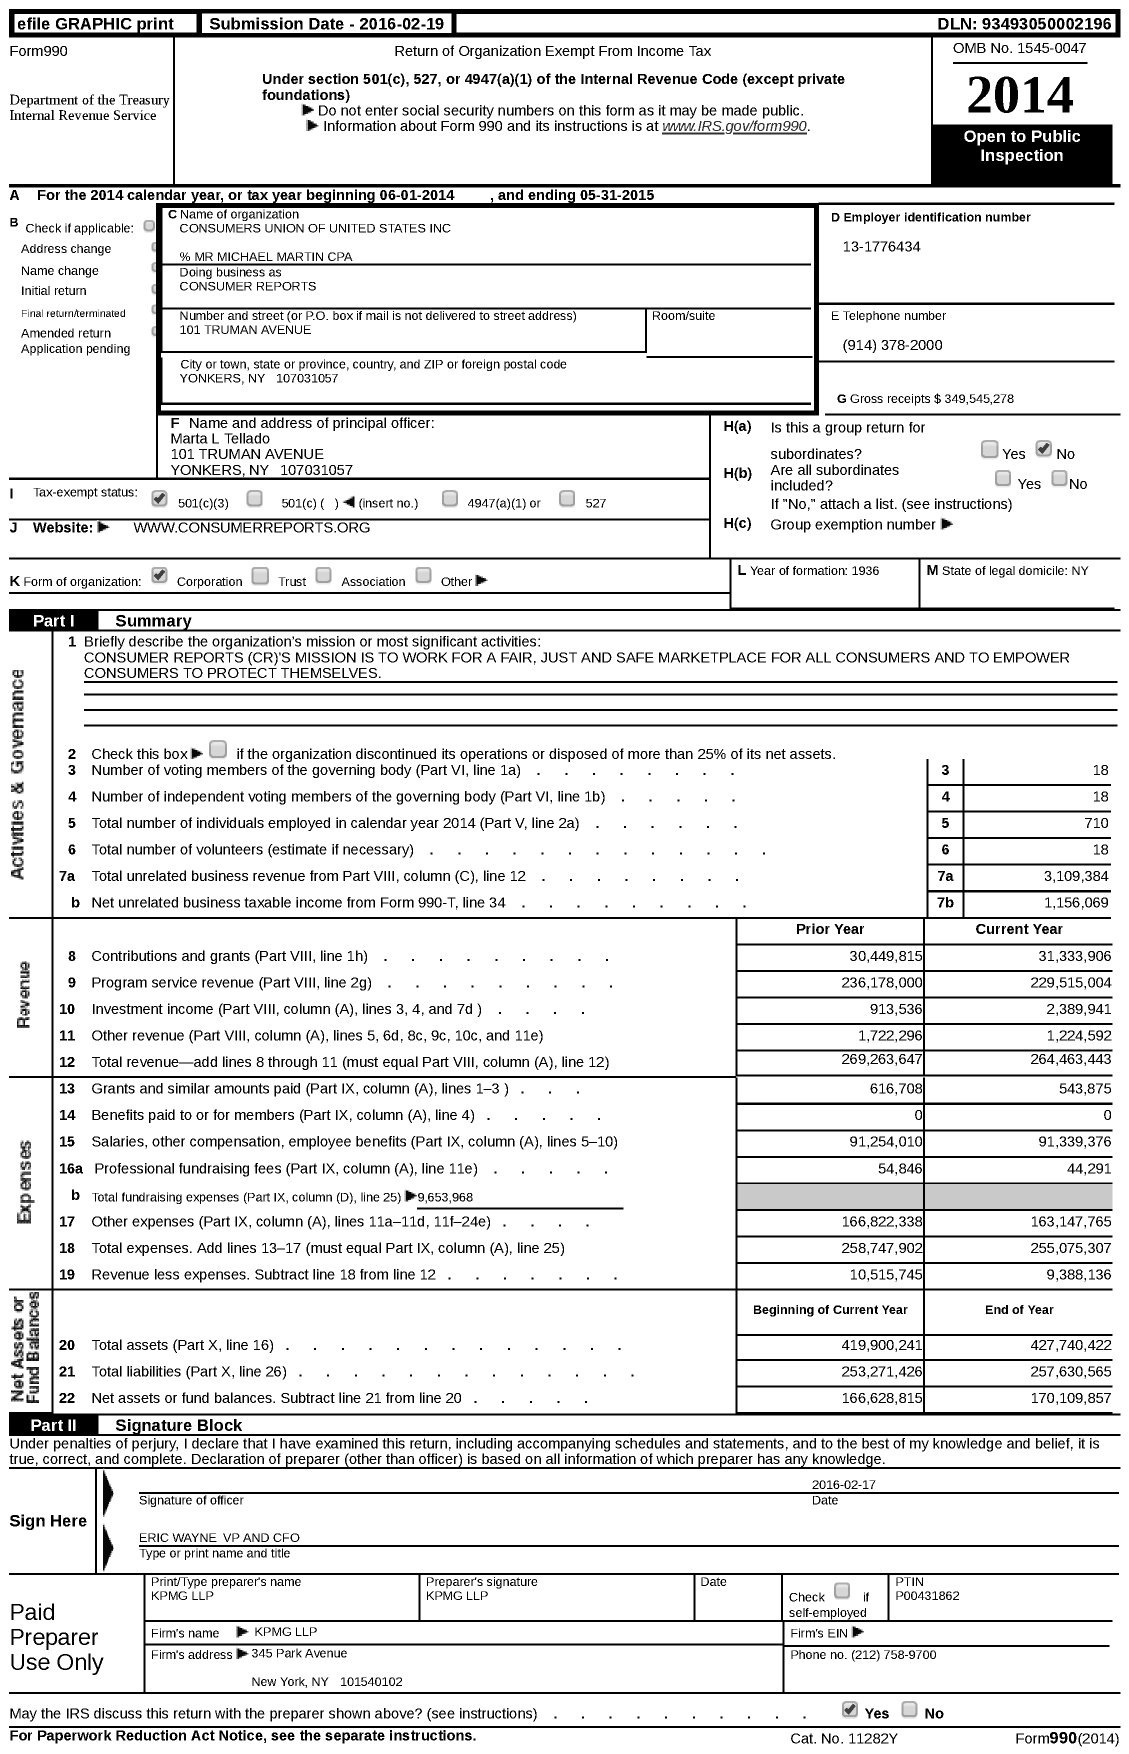 Image of first page of 2014 Form 990 for Consumer Reports (CR)